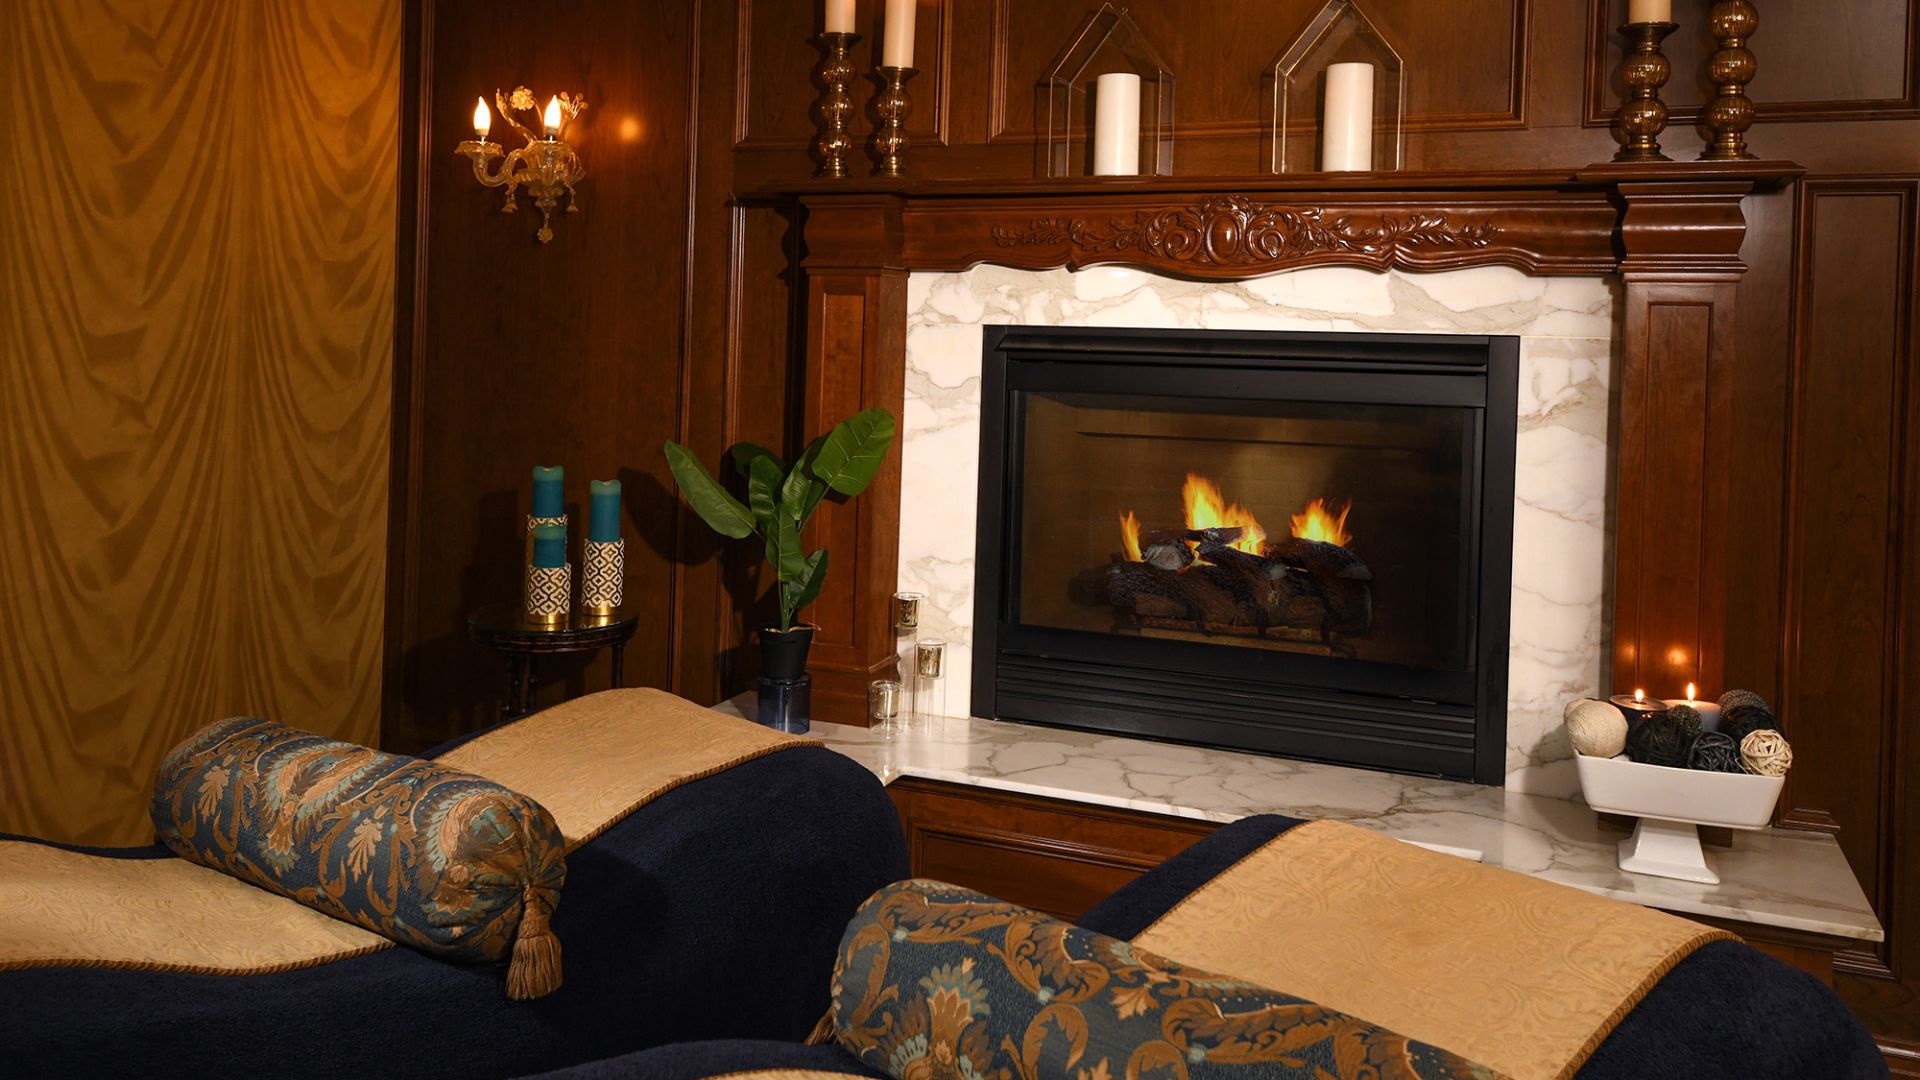 A Fire Place Sitting In A Living Room With A Fireplace